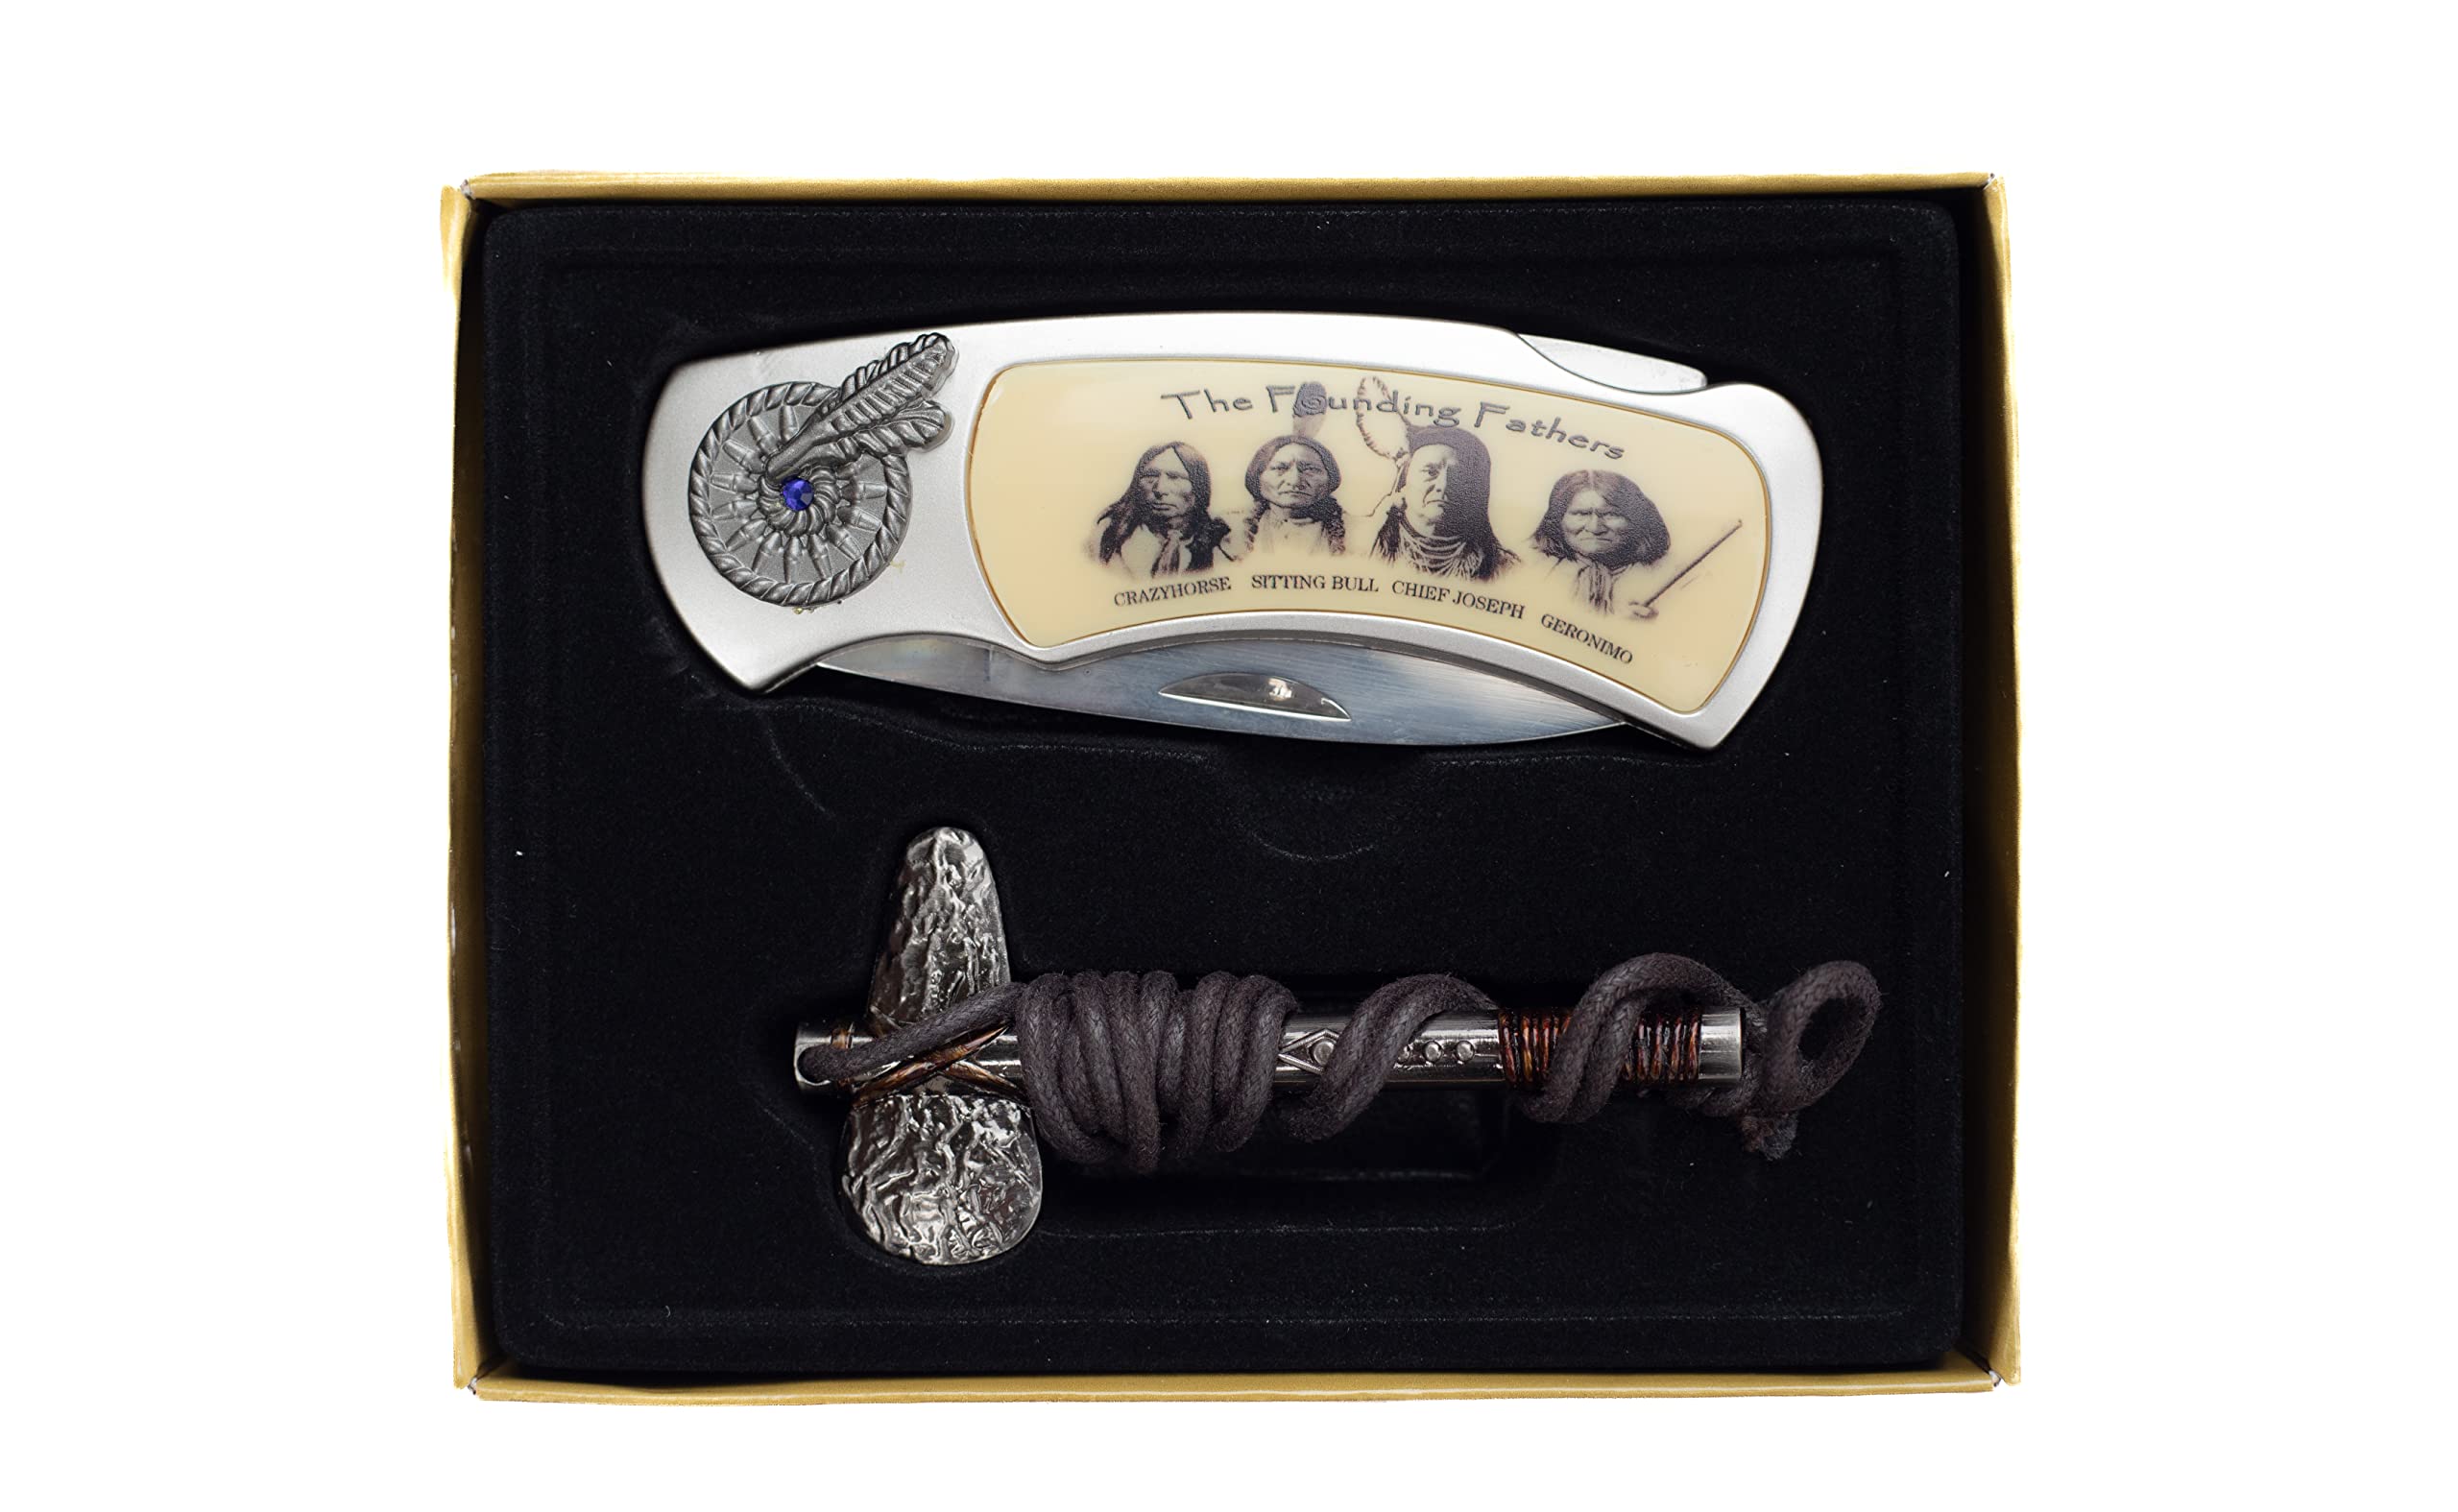 TRENDY ZONE 21 Founding Fathers Folding Pocket Knife with Embossed Dream Catcher I Tomahawk Pendant on a Leather-Thread I Packed Inside an Artistic Box |Closed Knife Length- 4" | Open Knife Length– 7”